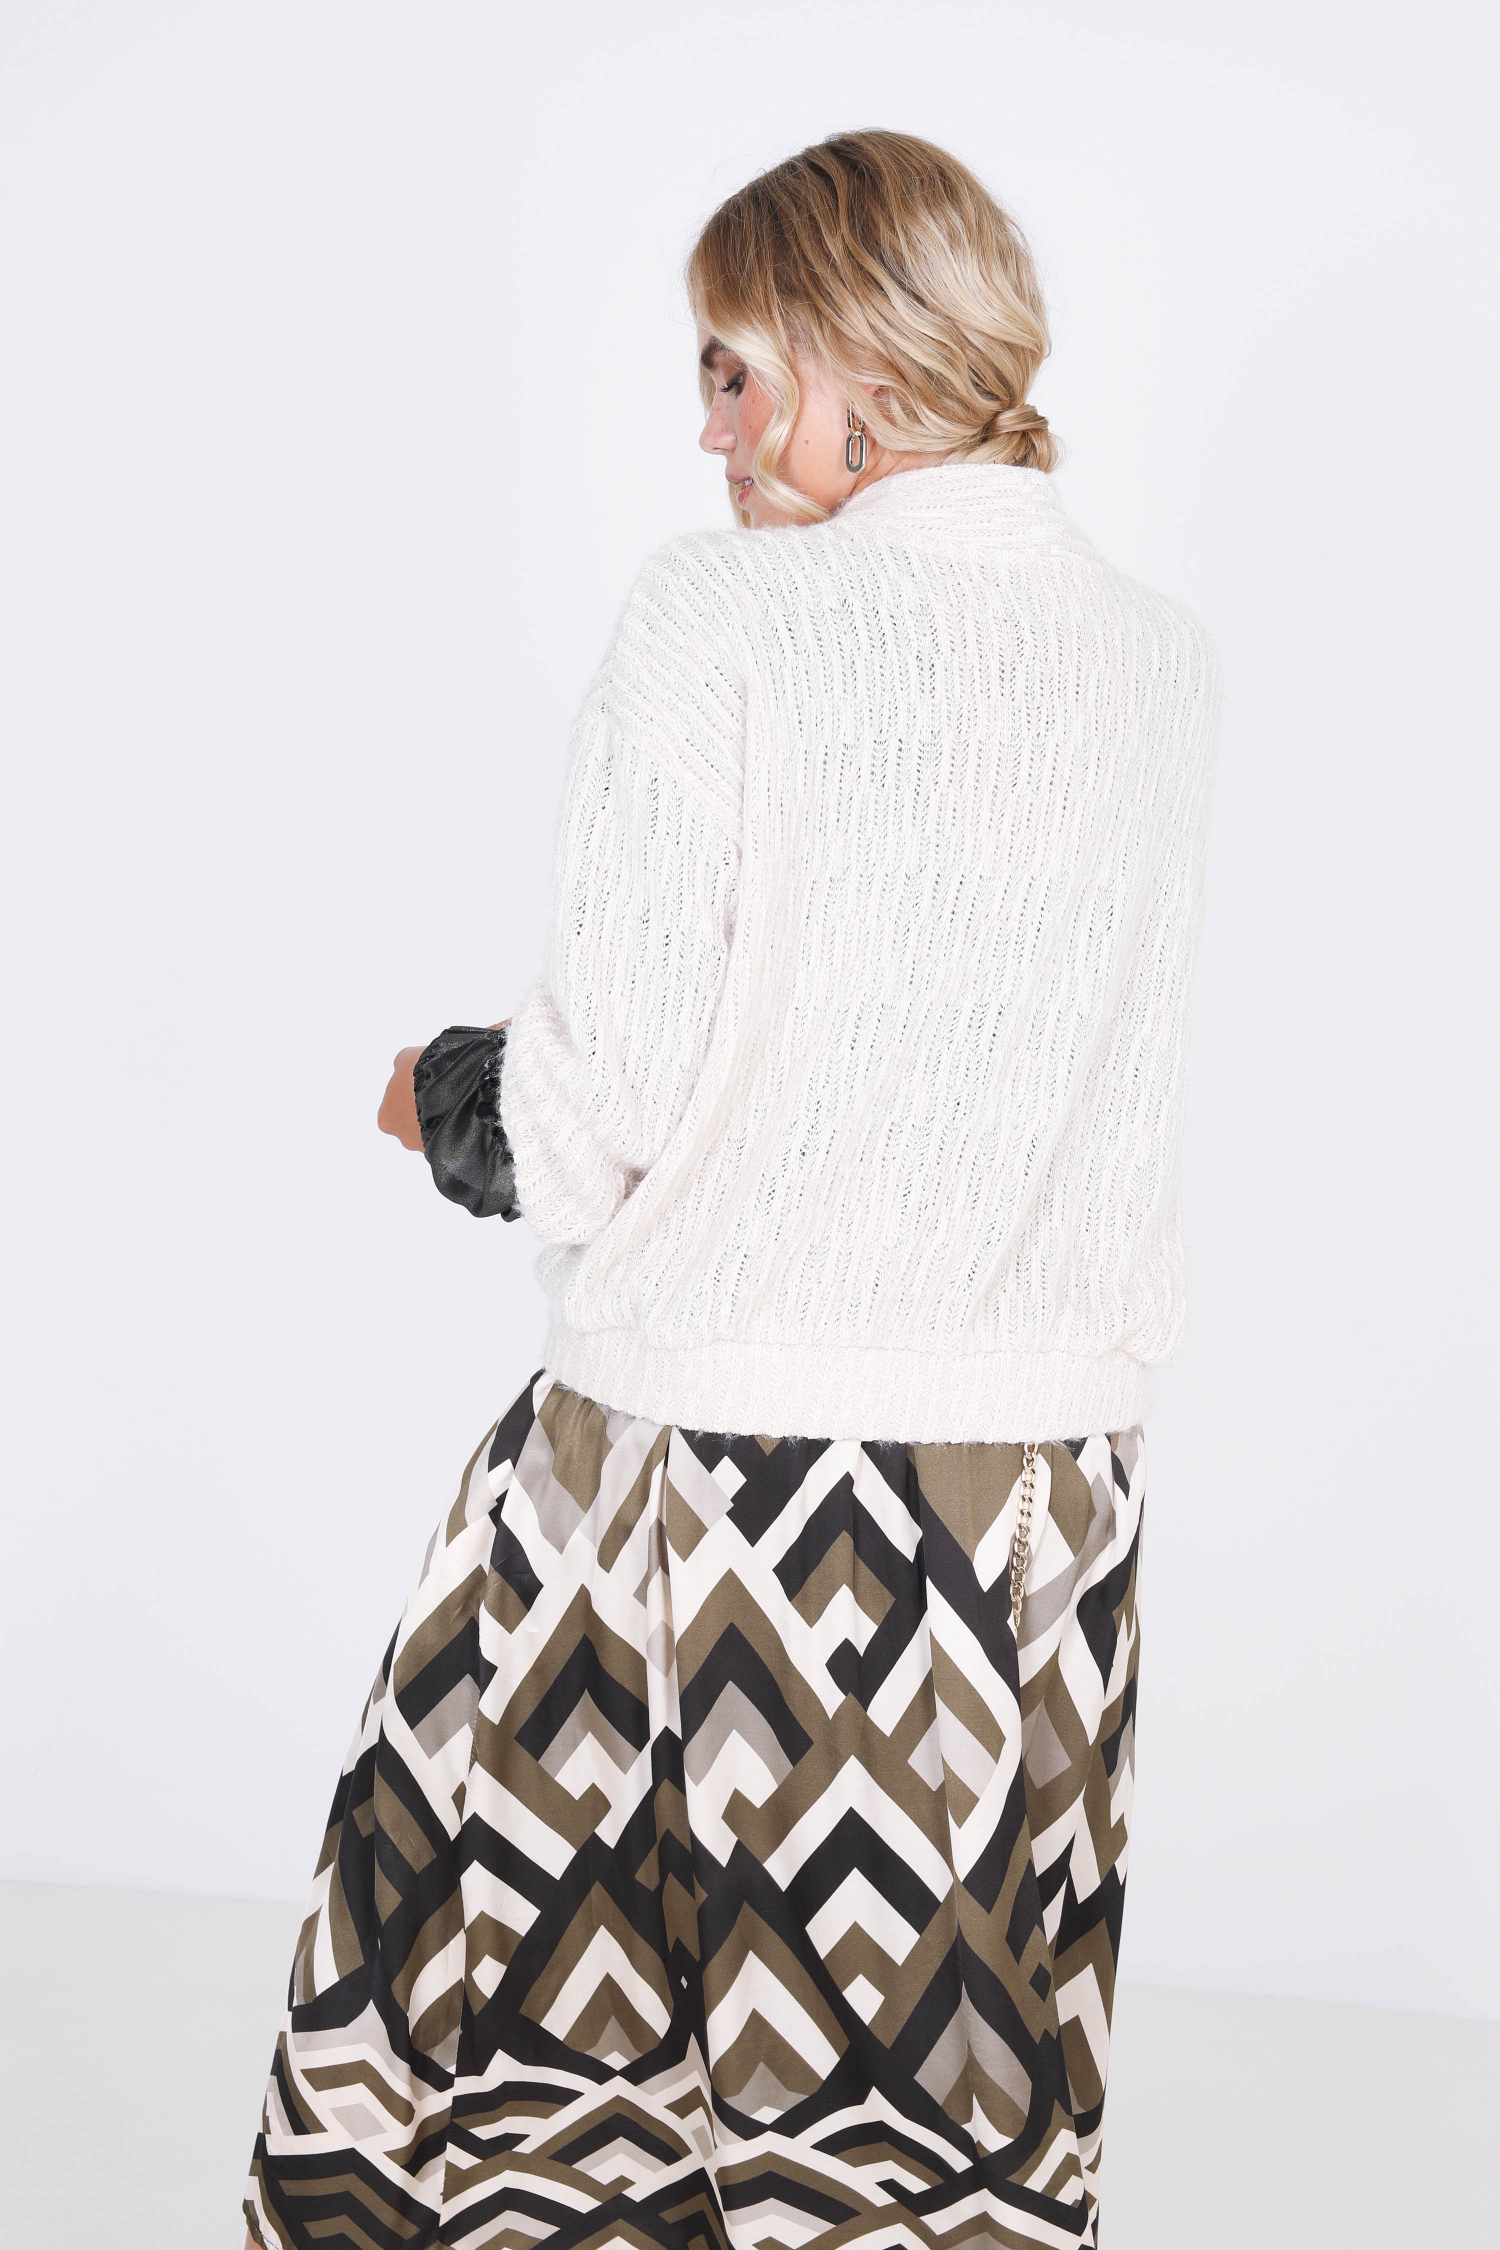 Short plain knit cardigan with cable effect